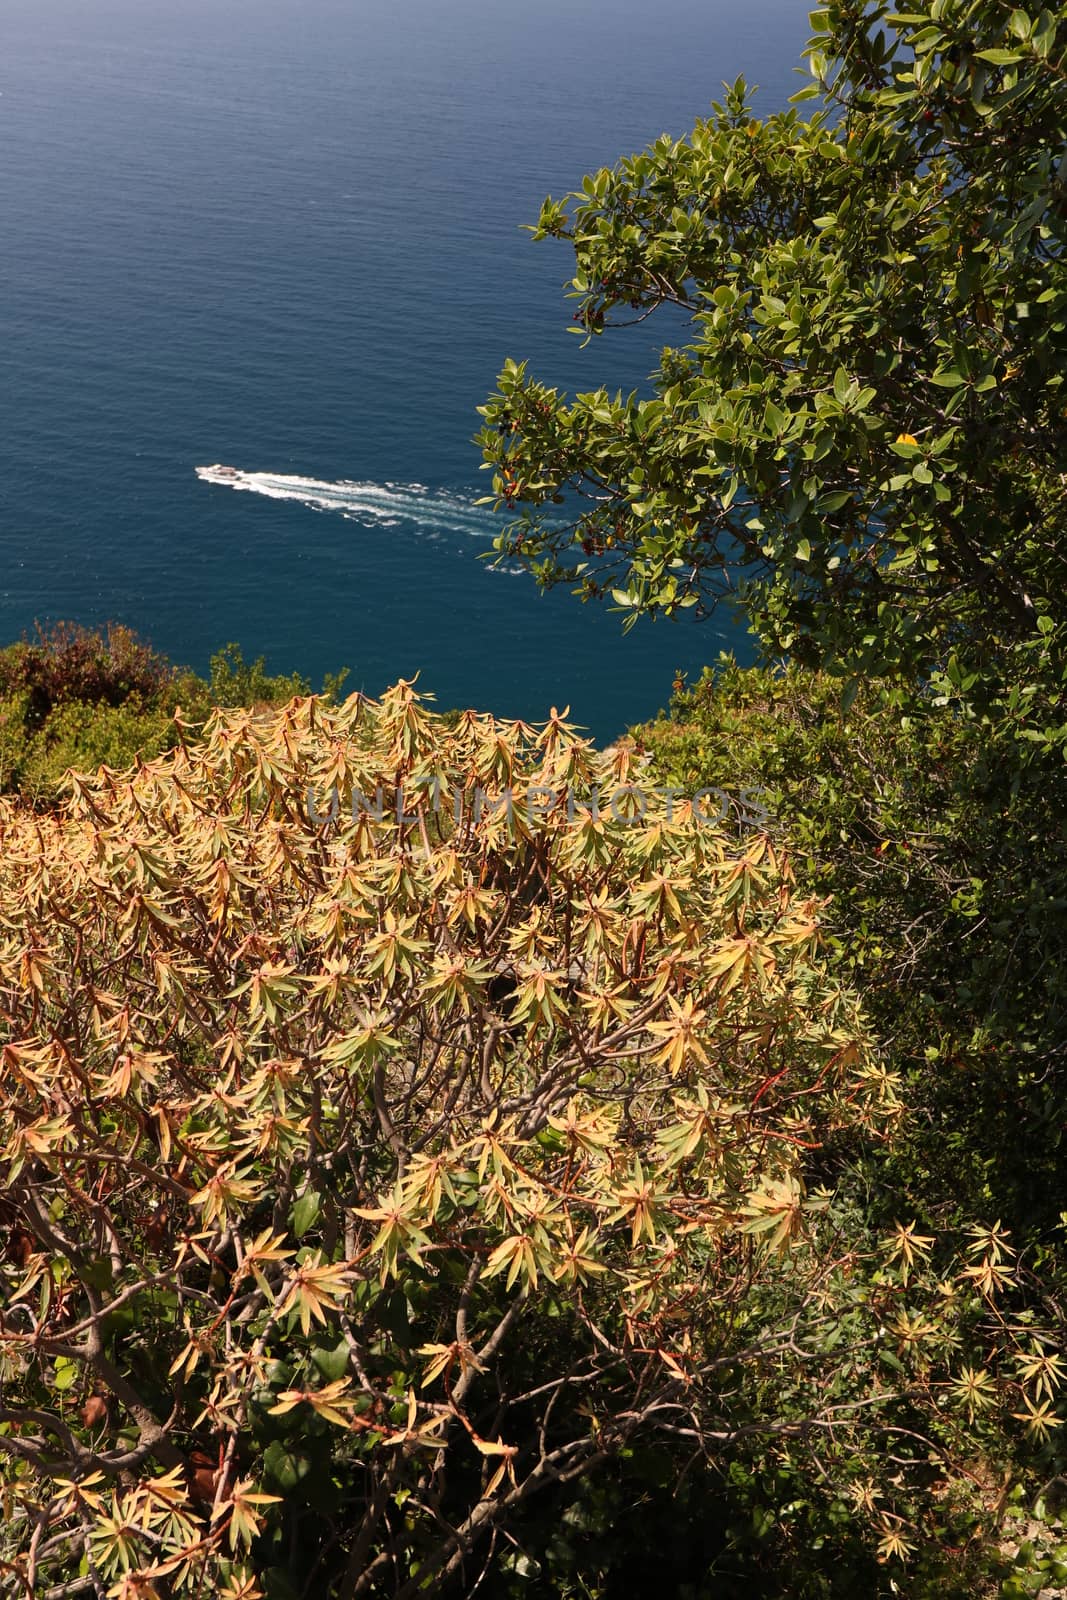 Hills of the Cinque Terre with typical Mediterranean vegetation. Euphorbia. Sea with motorboat trail.